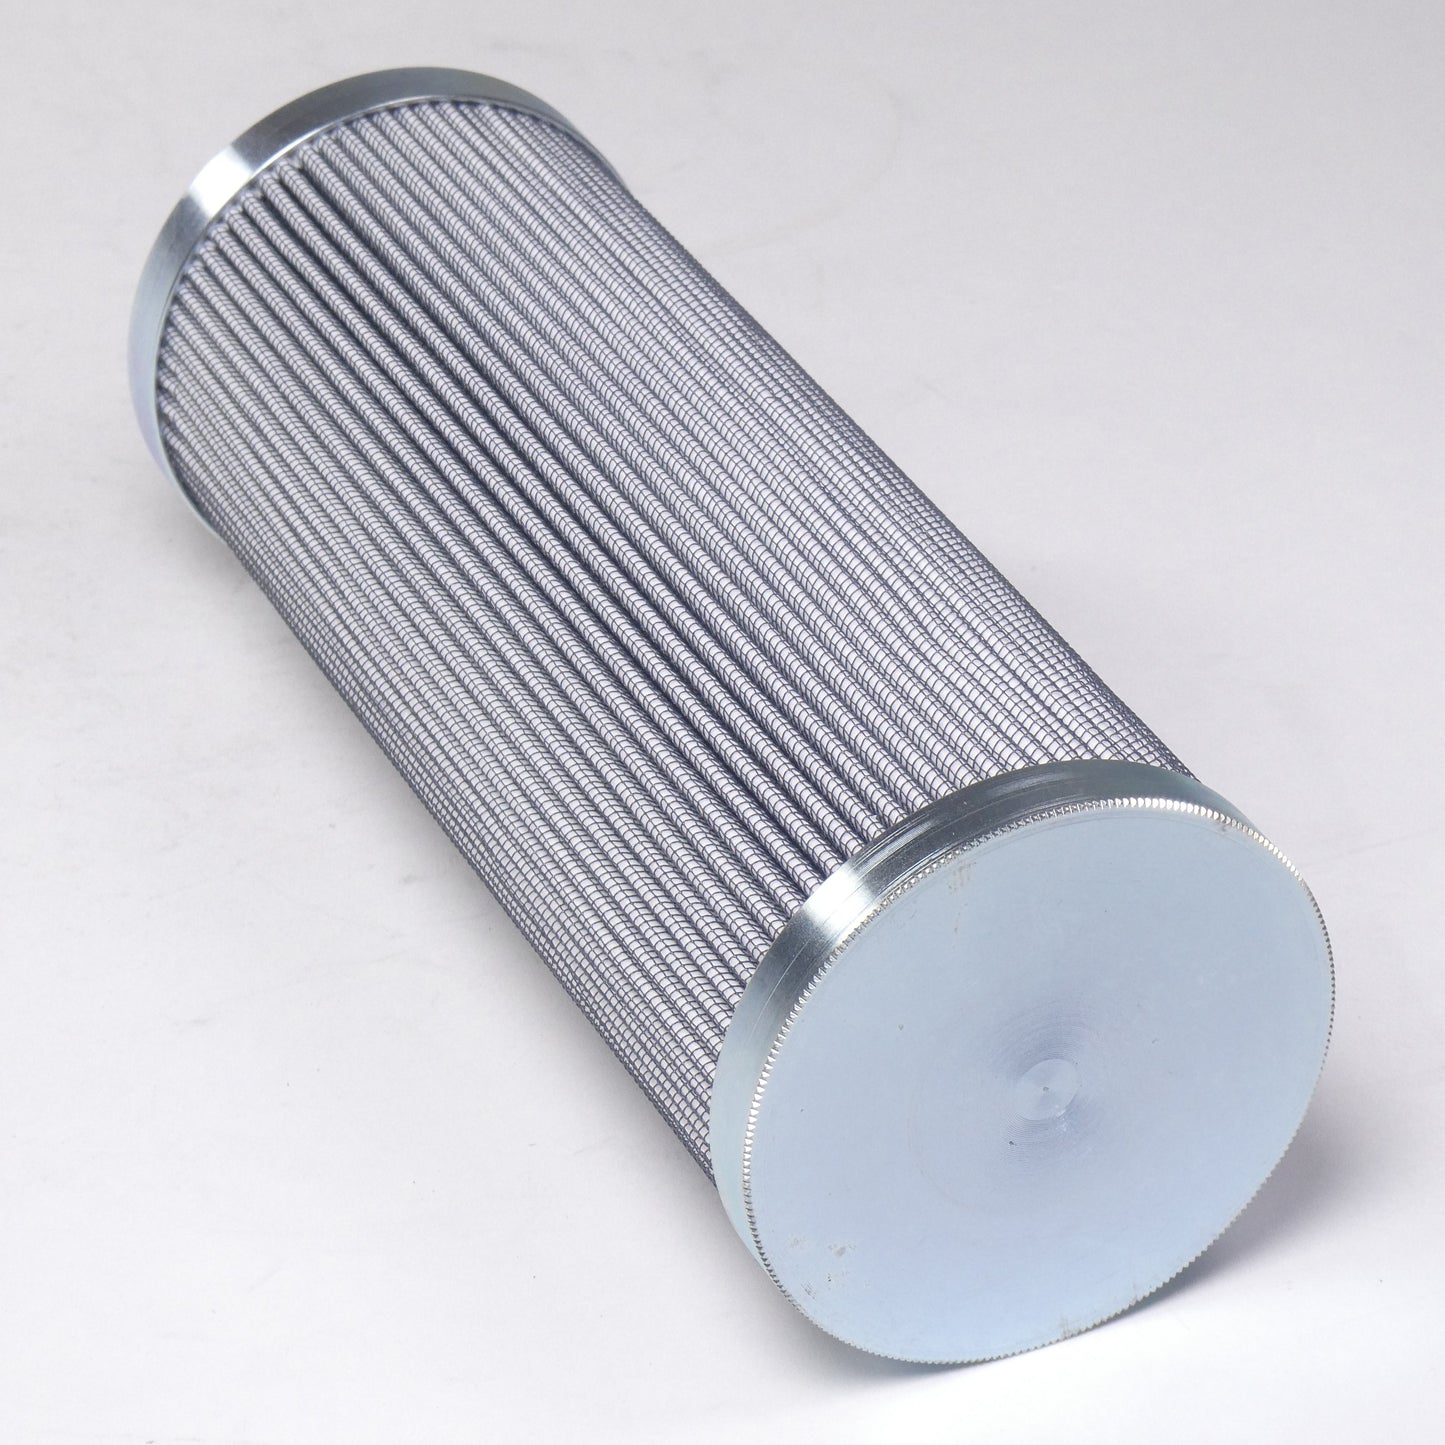 Hydrafil Replacement Filter Element for Pall HC9601ENK8H